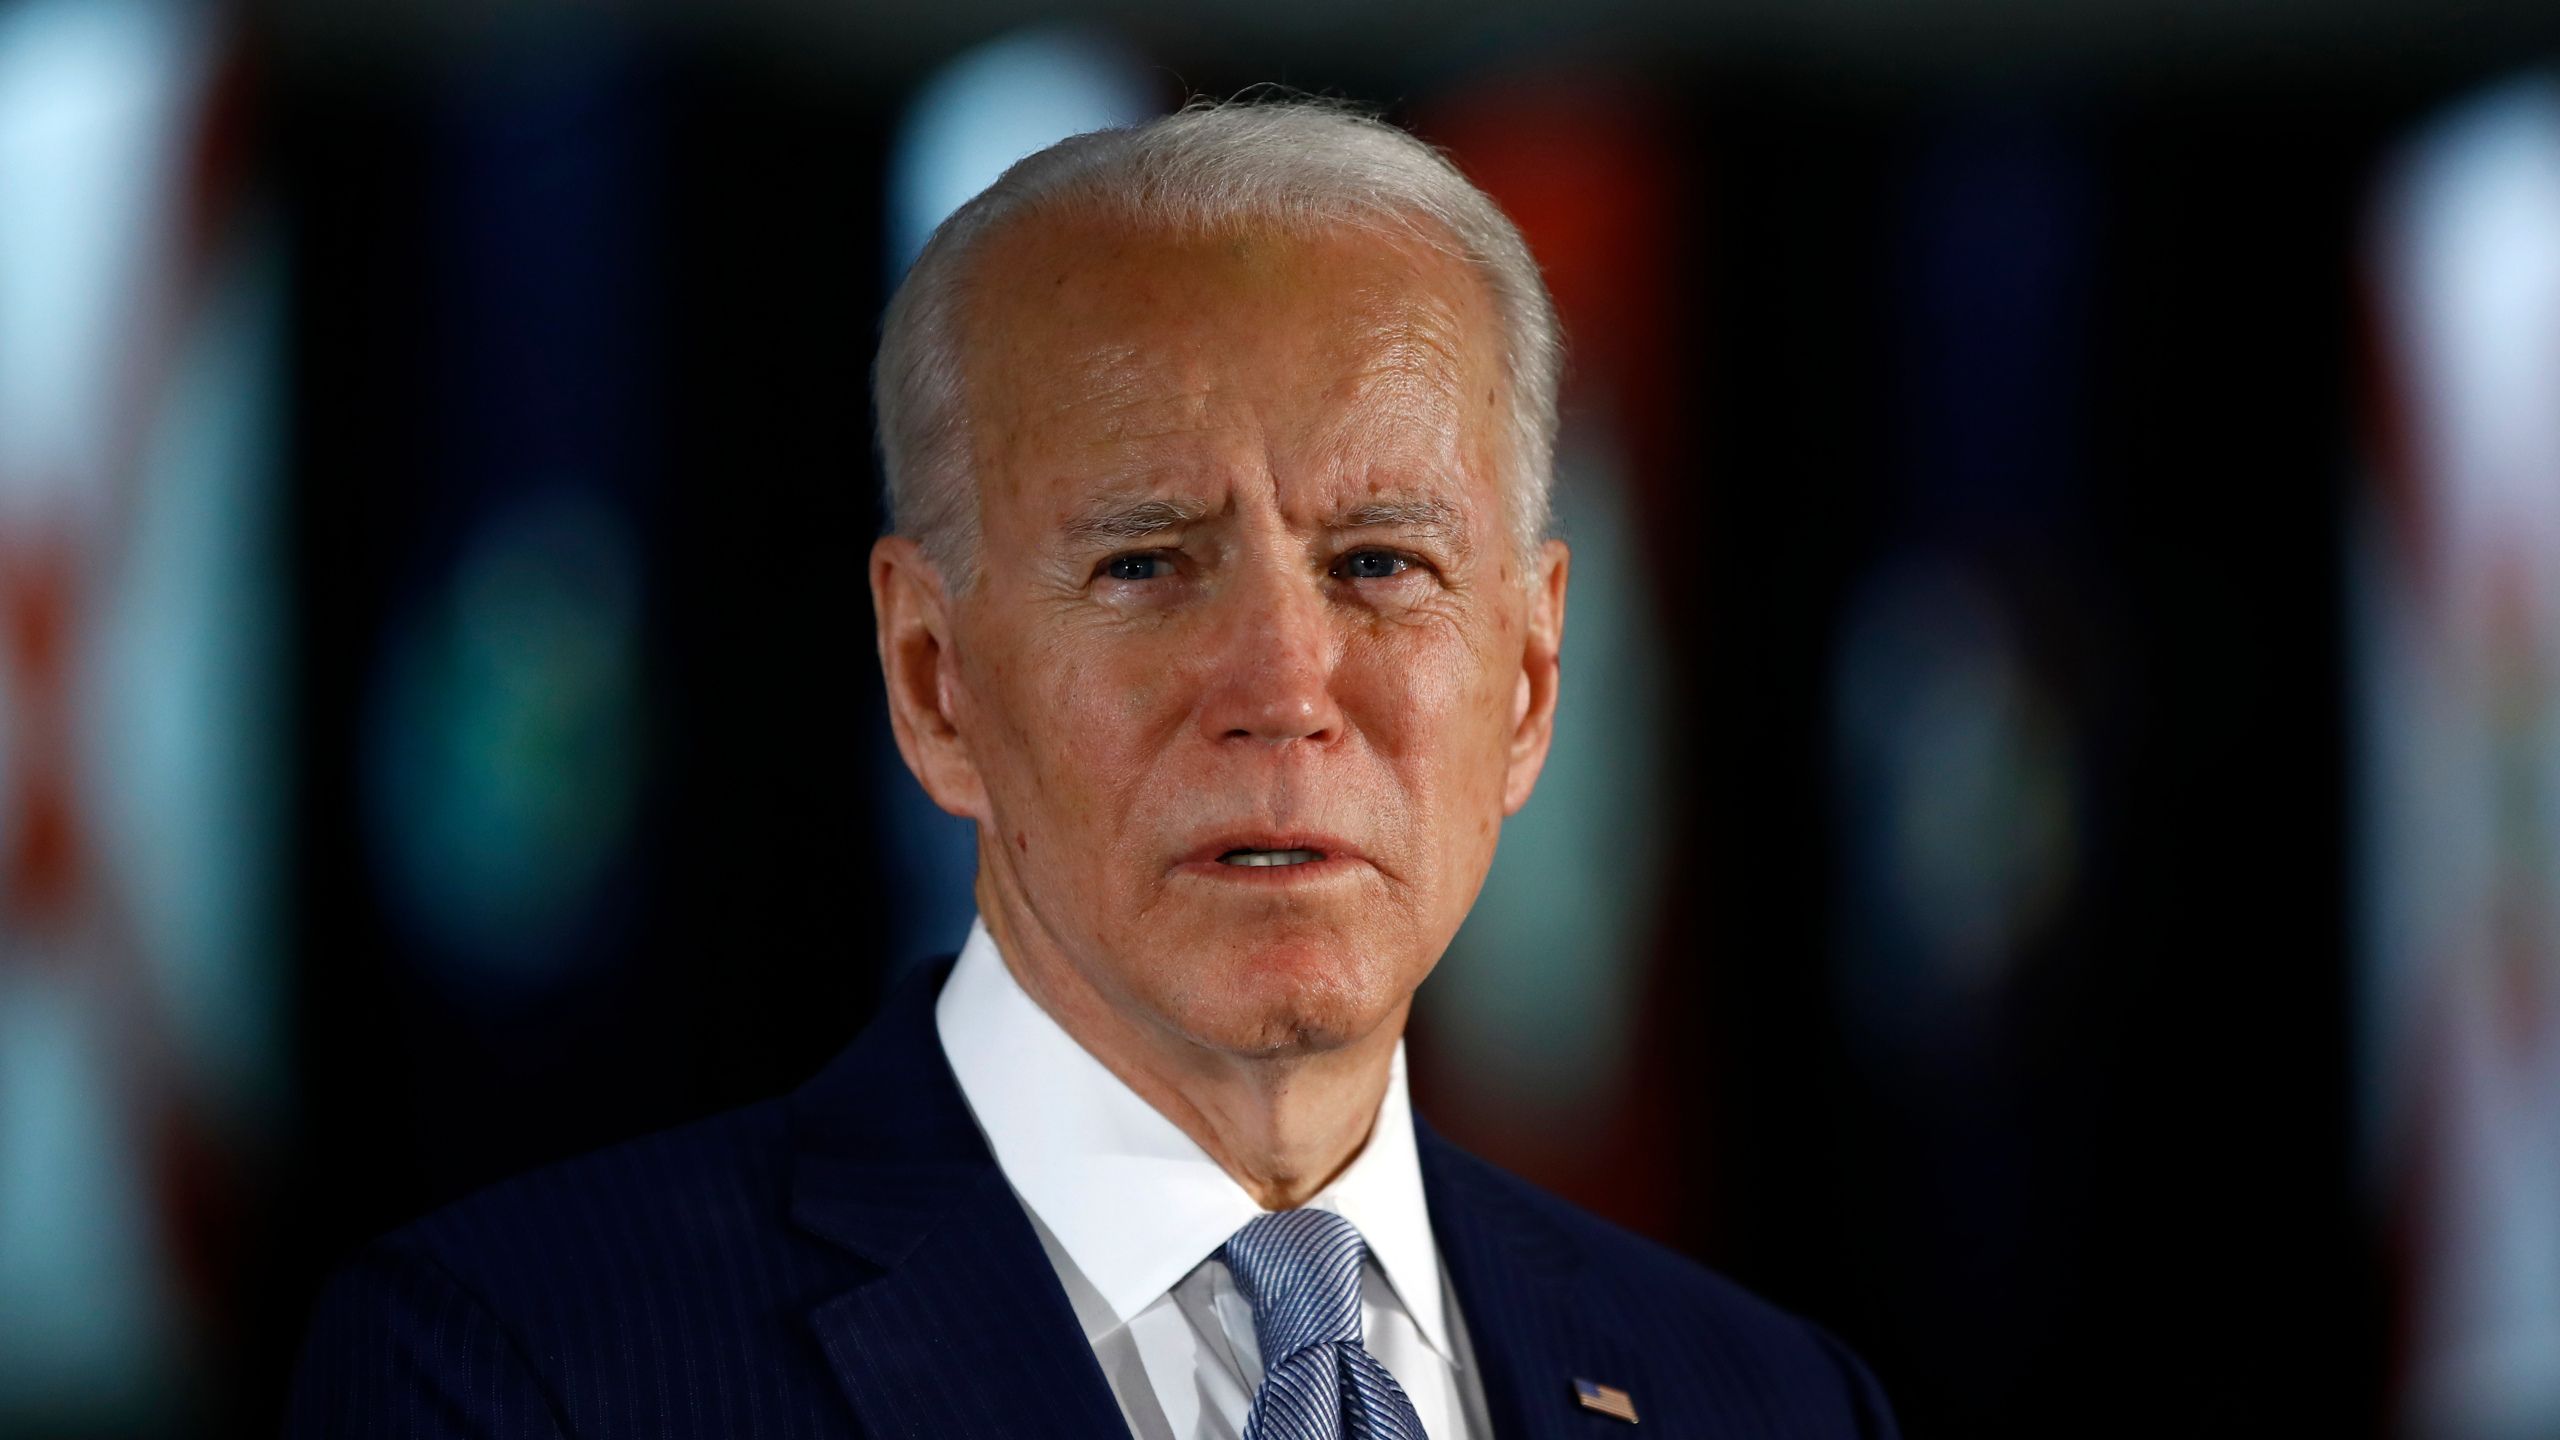 Biden to respond to protests in Philadelphia Tuesday morning